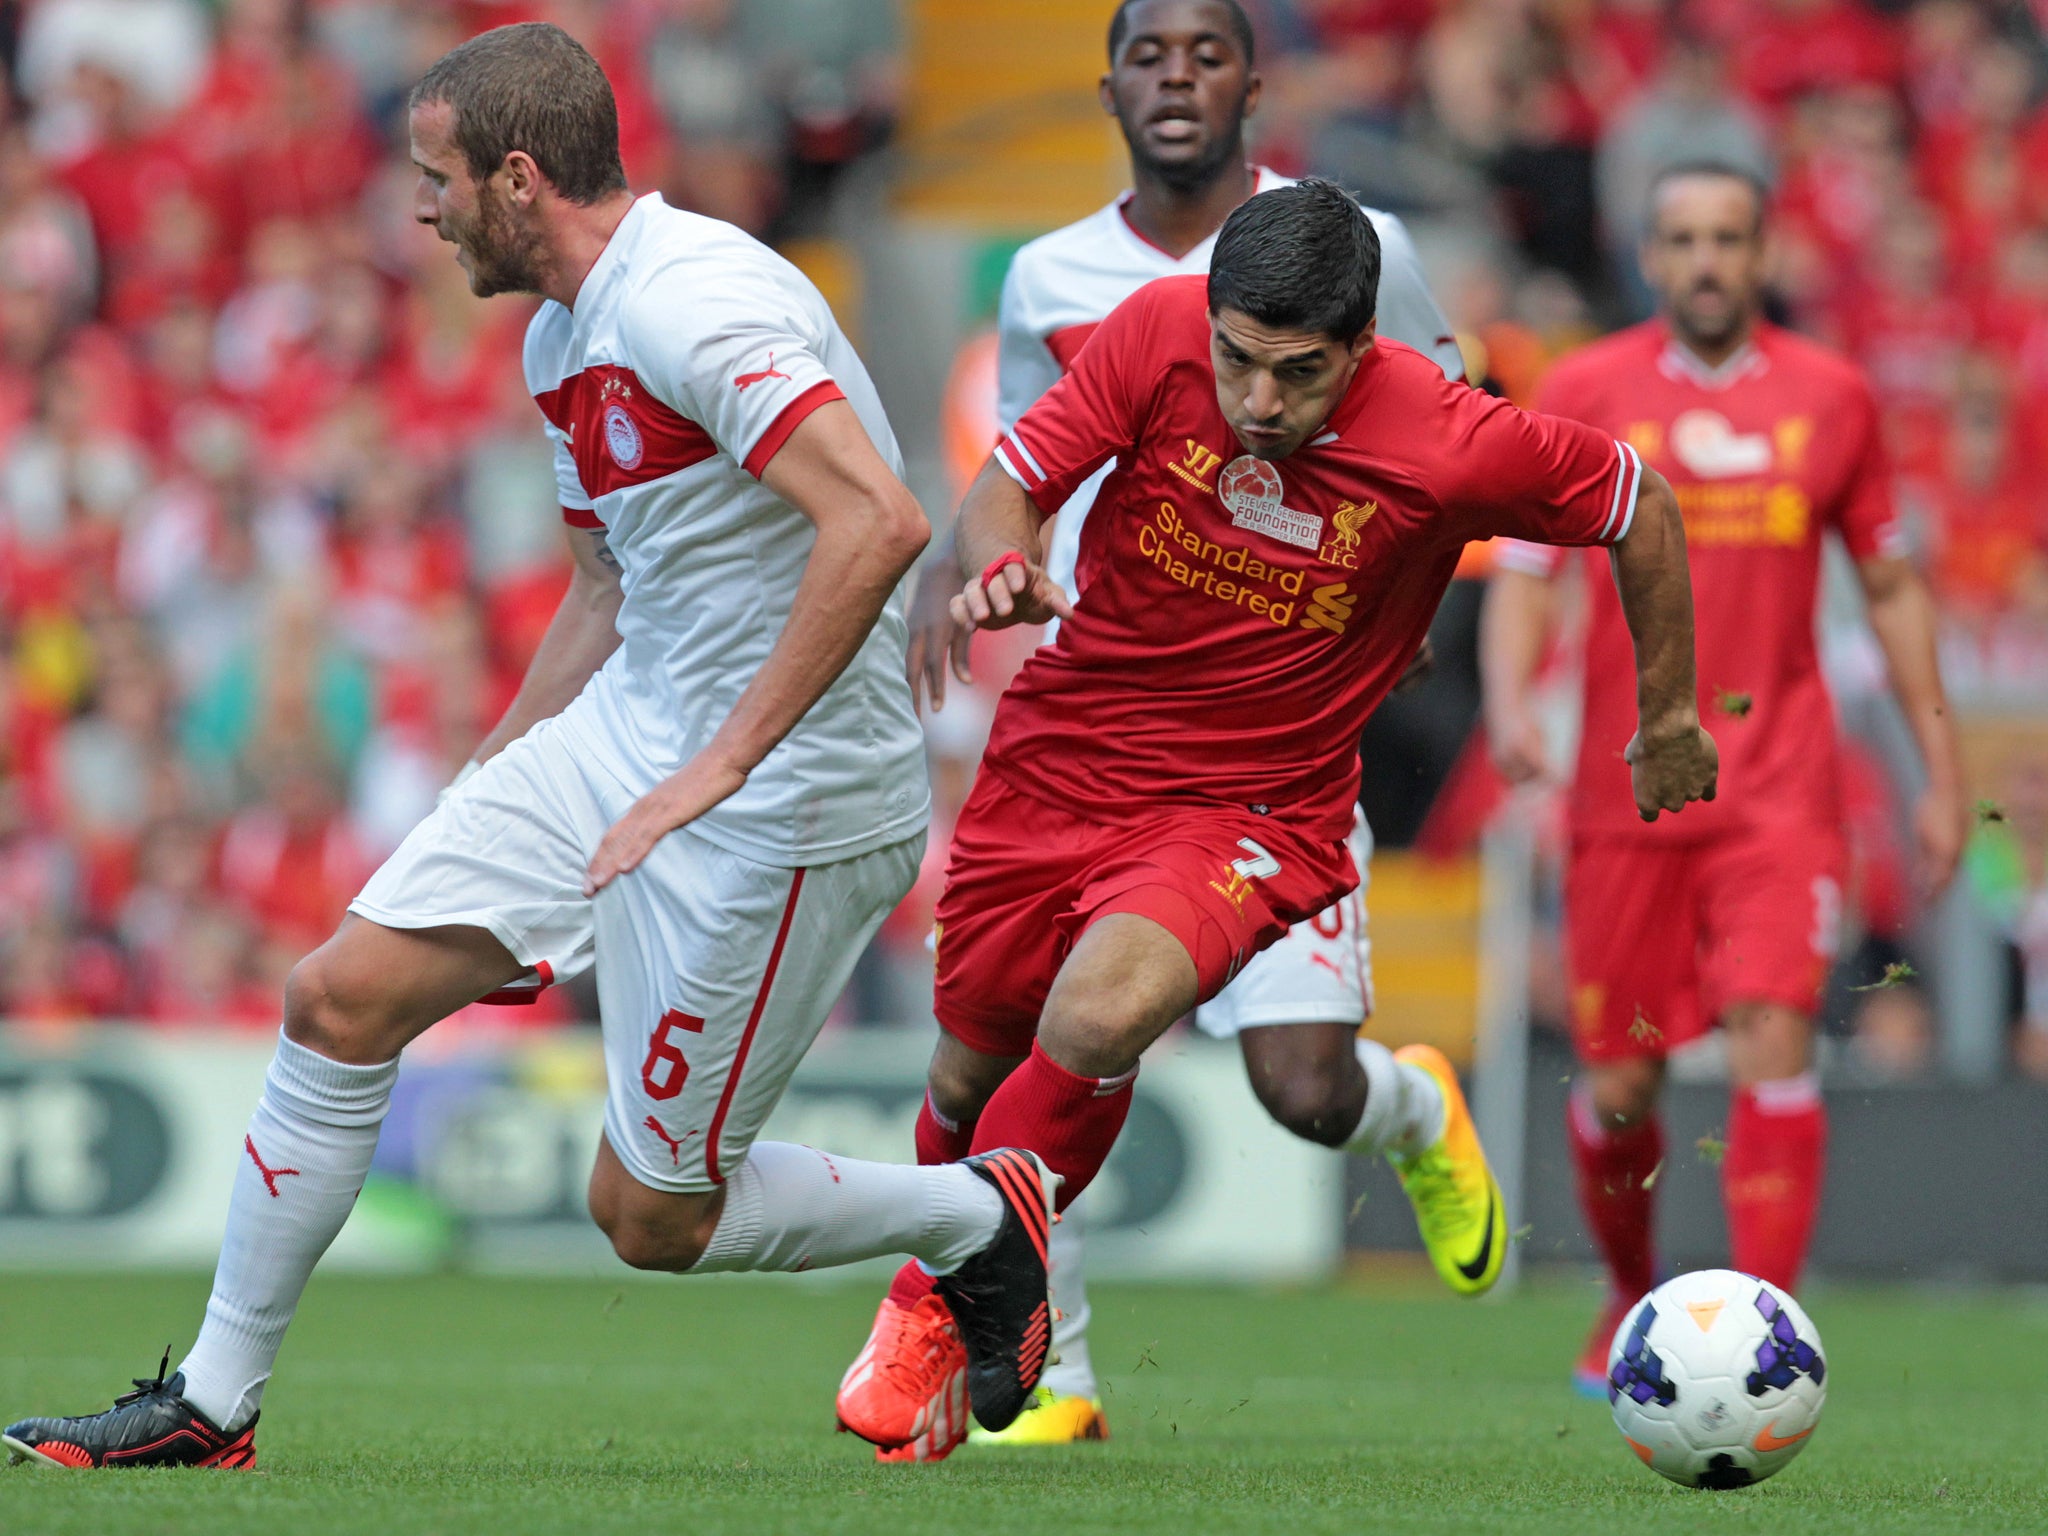 Luis Suarez in action during Steven Gerrard's testimonial as Liverpool take on Olympiacos